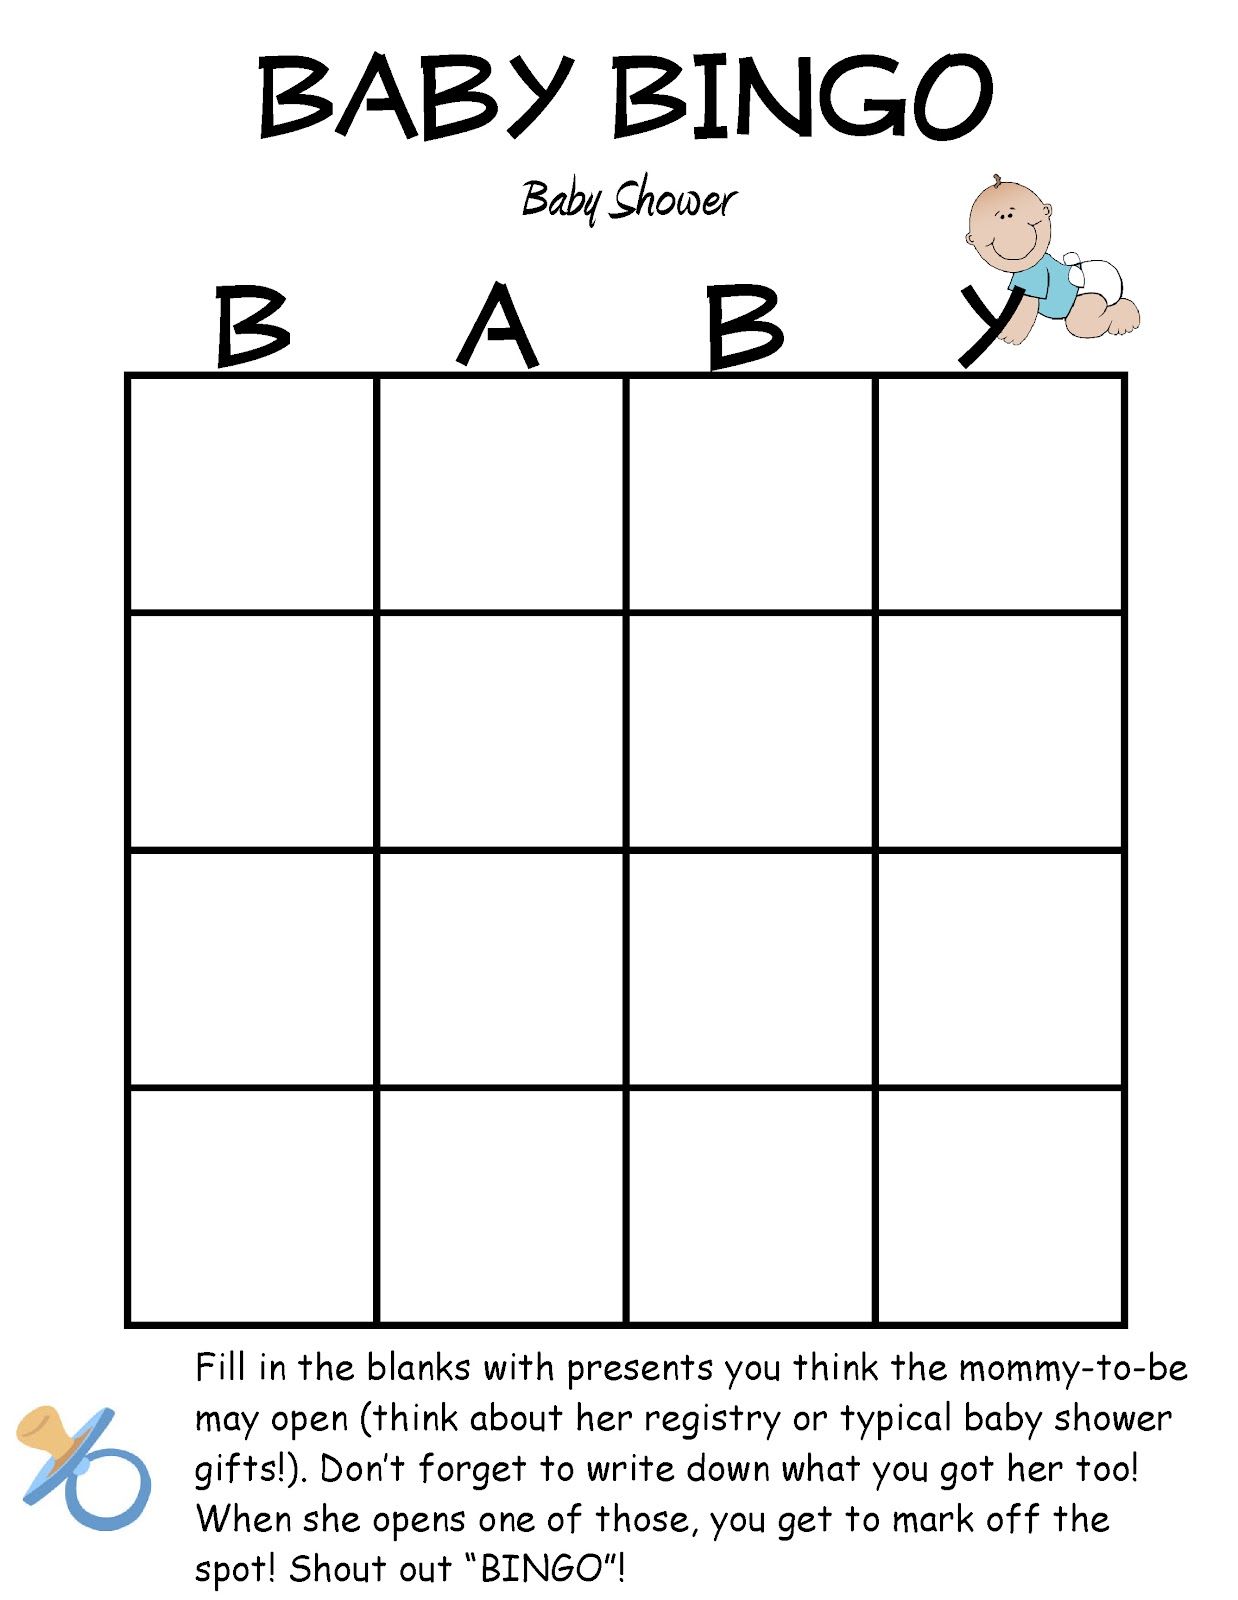 downloadable-50-free-printable-baby-domain-7o-cards